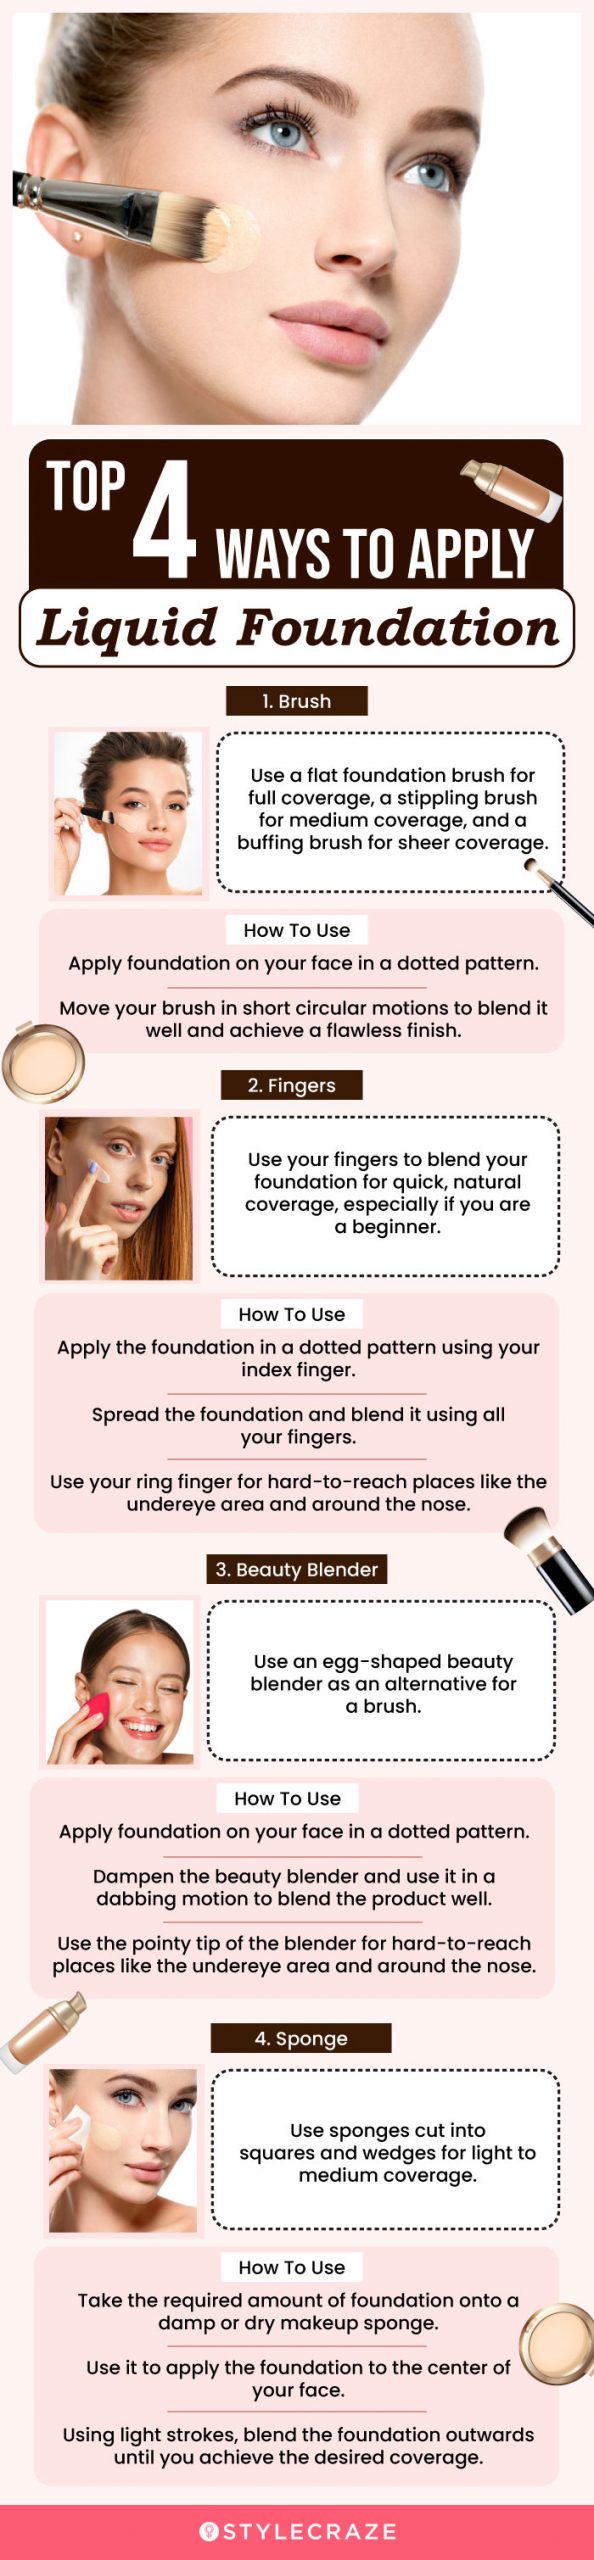 top 4 ways to apply liquid foundation (infographic)